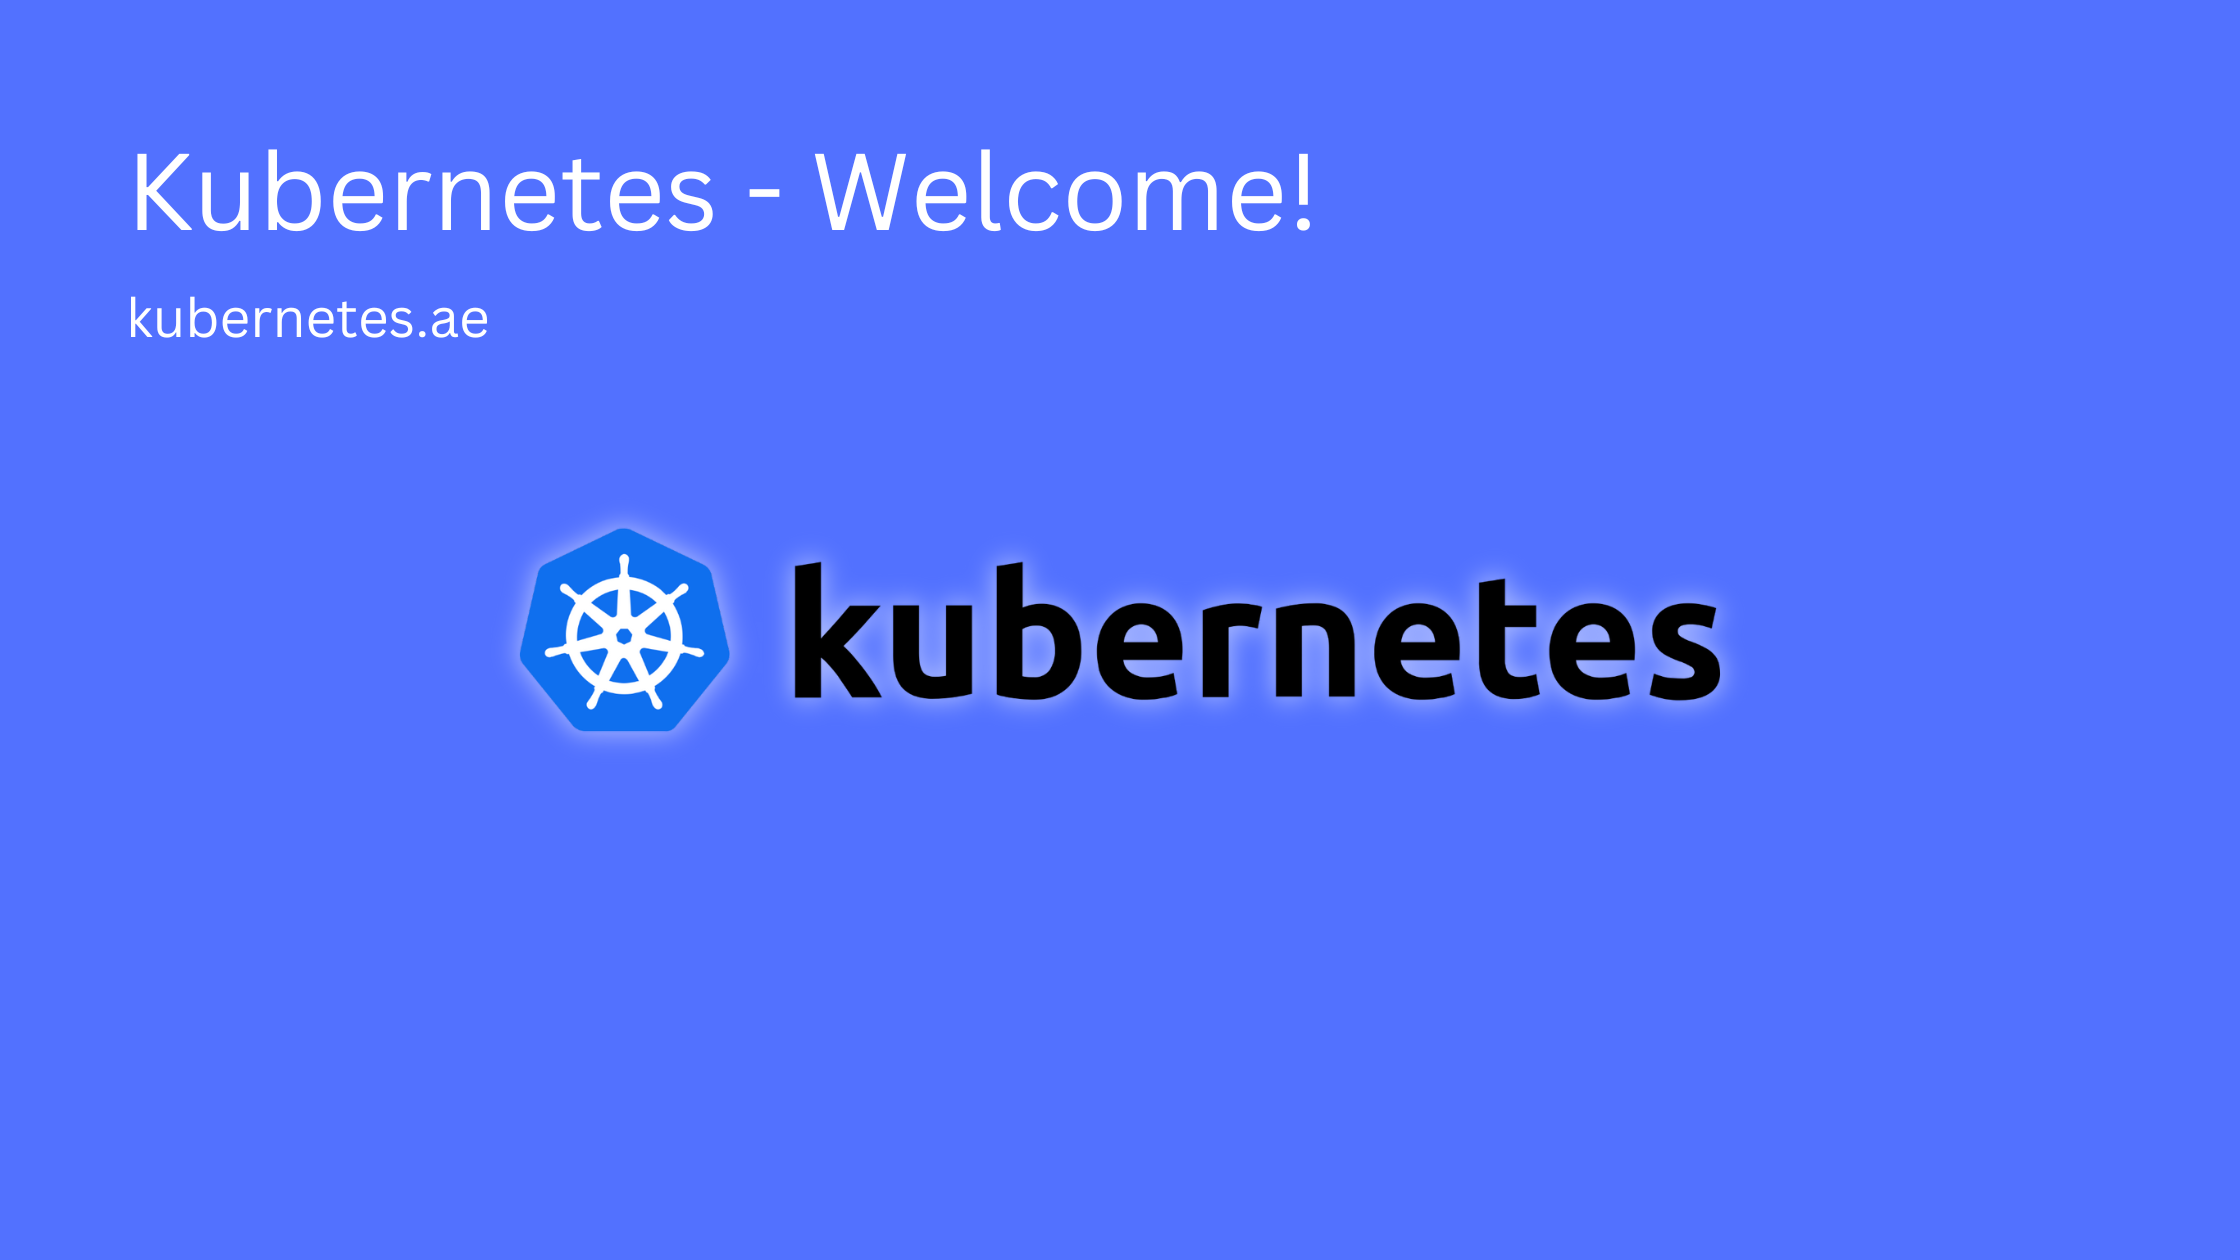 What is Kubernetes?